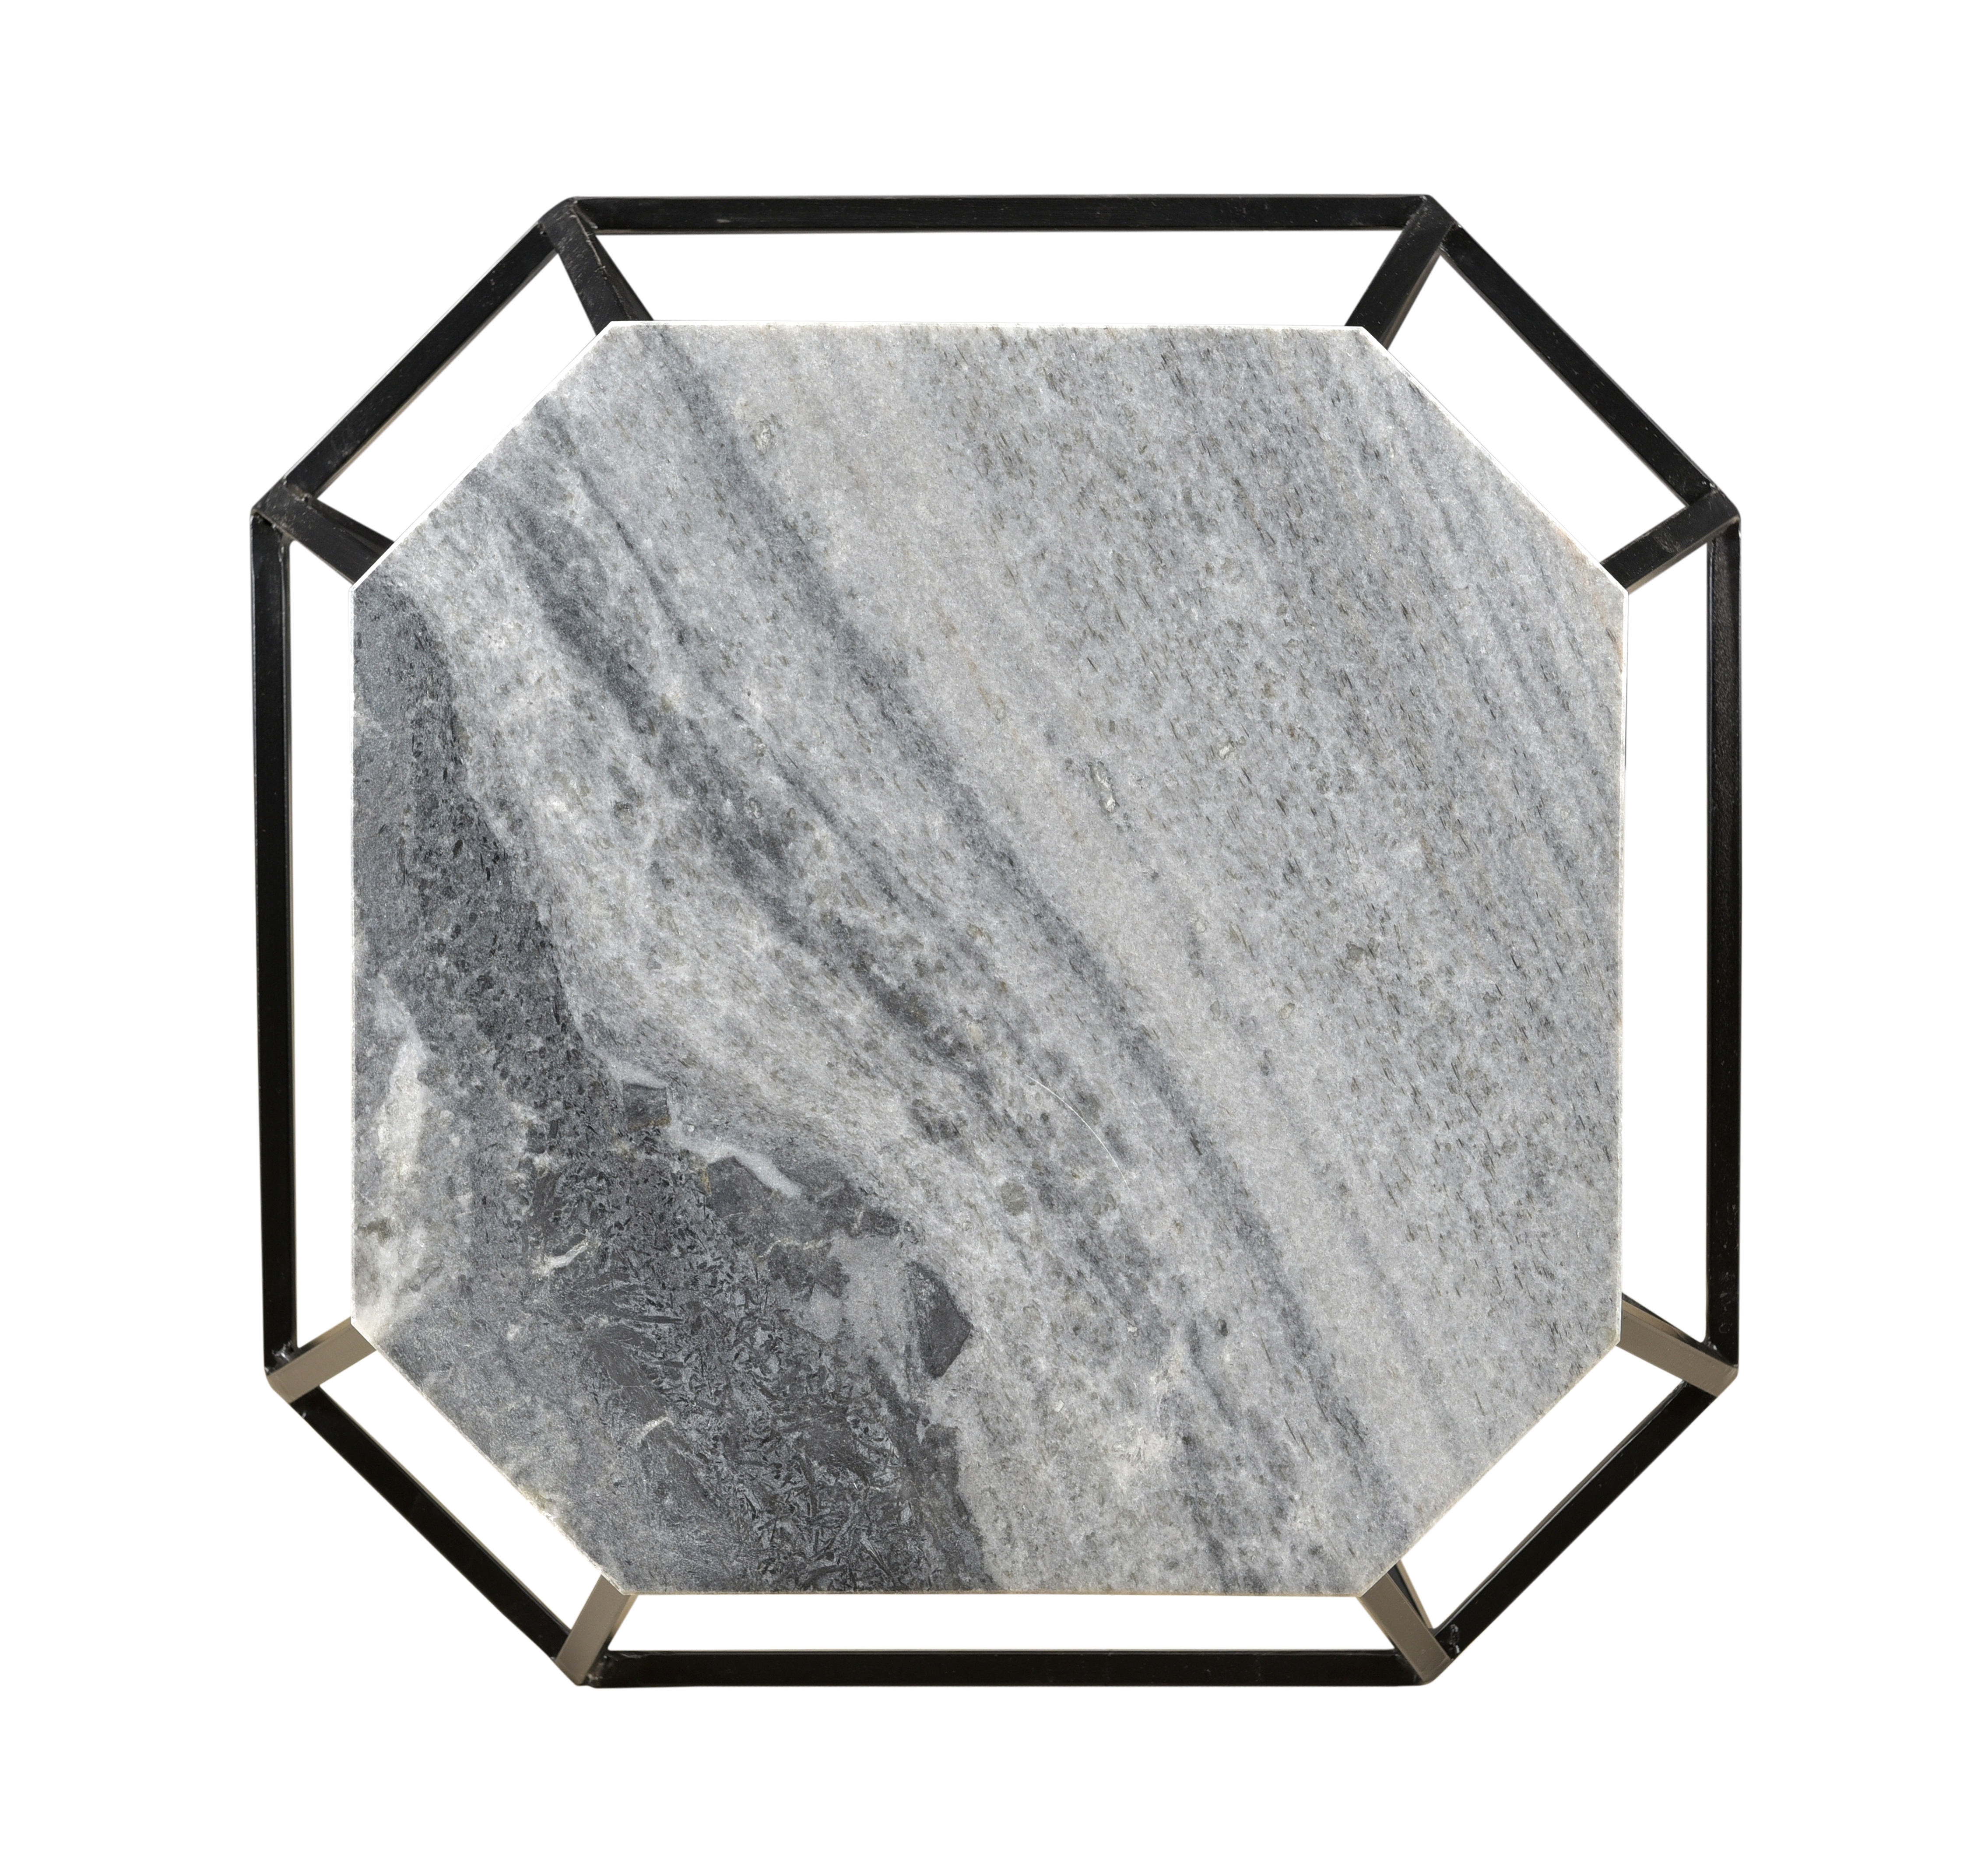 Octagonal Accent Table - Whispy Grey Marble & Black Powder Coat - Image 4